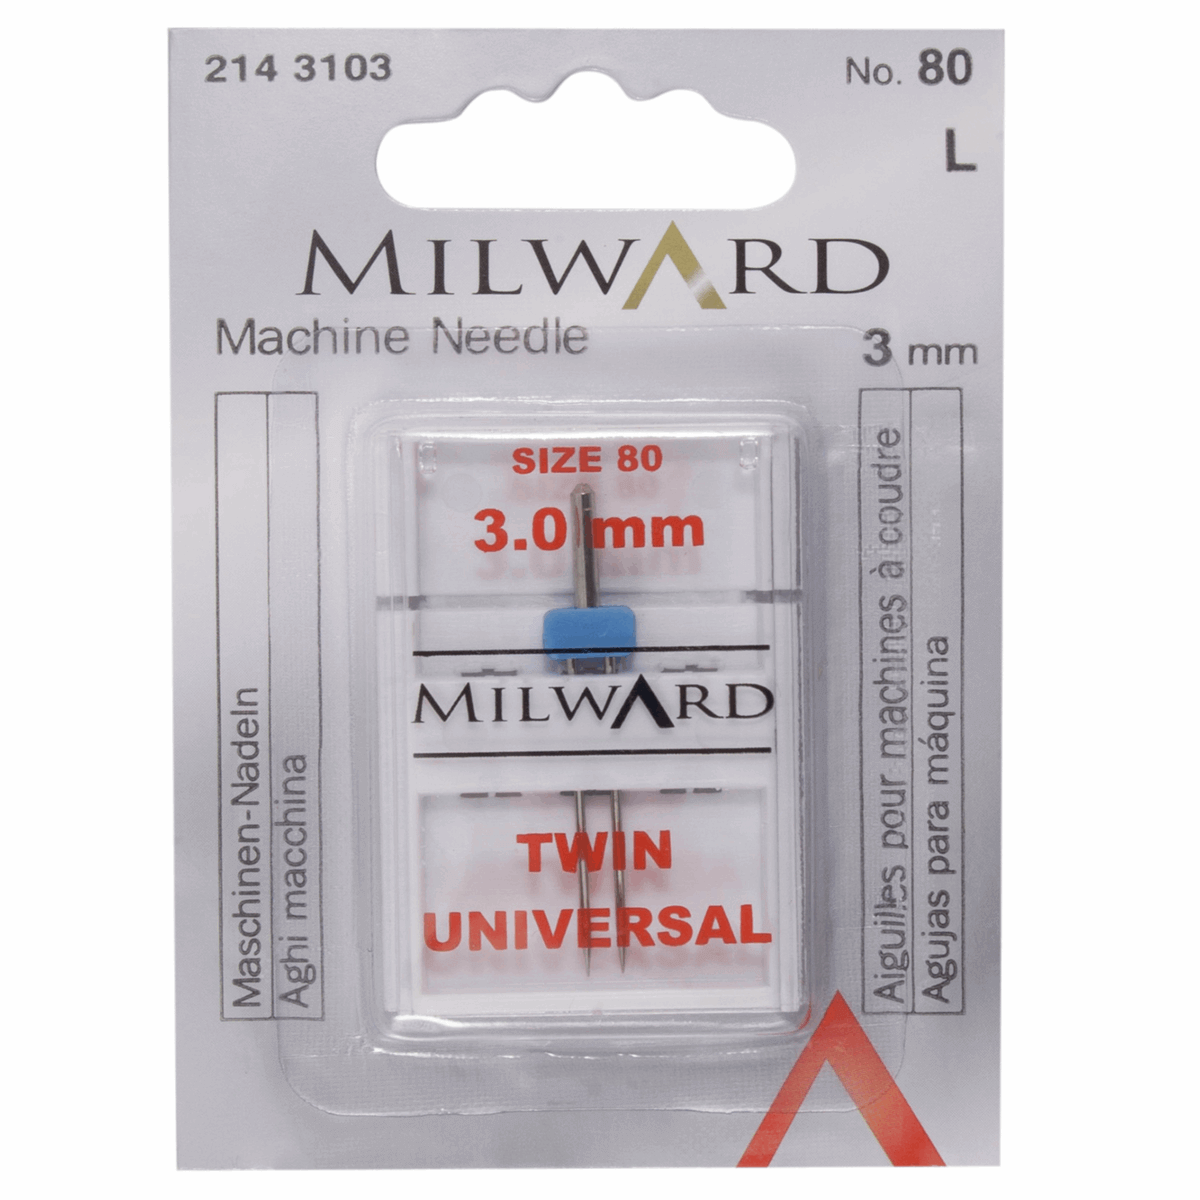 Twin sewing needles: universal 80/12 3 mm and stretch 75/11 2.5 mm and 4 mm. Milward